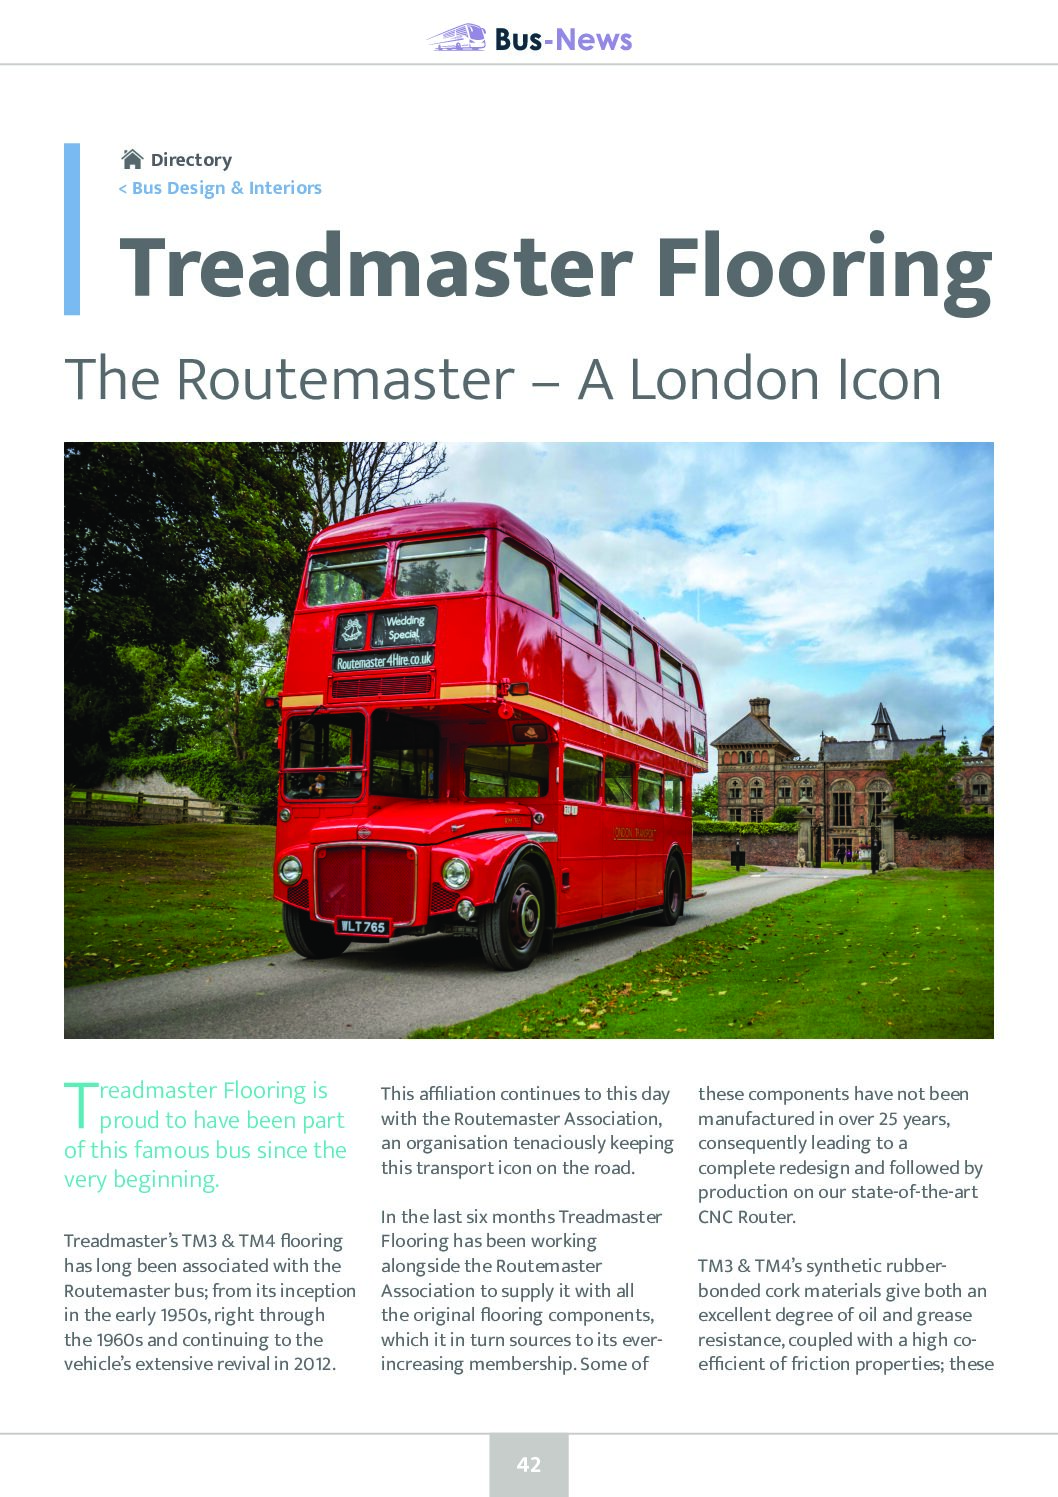 The Routemaster – A London Icon